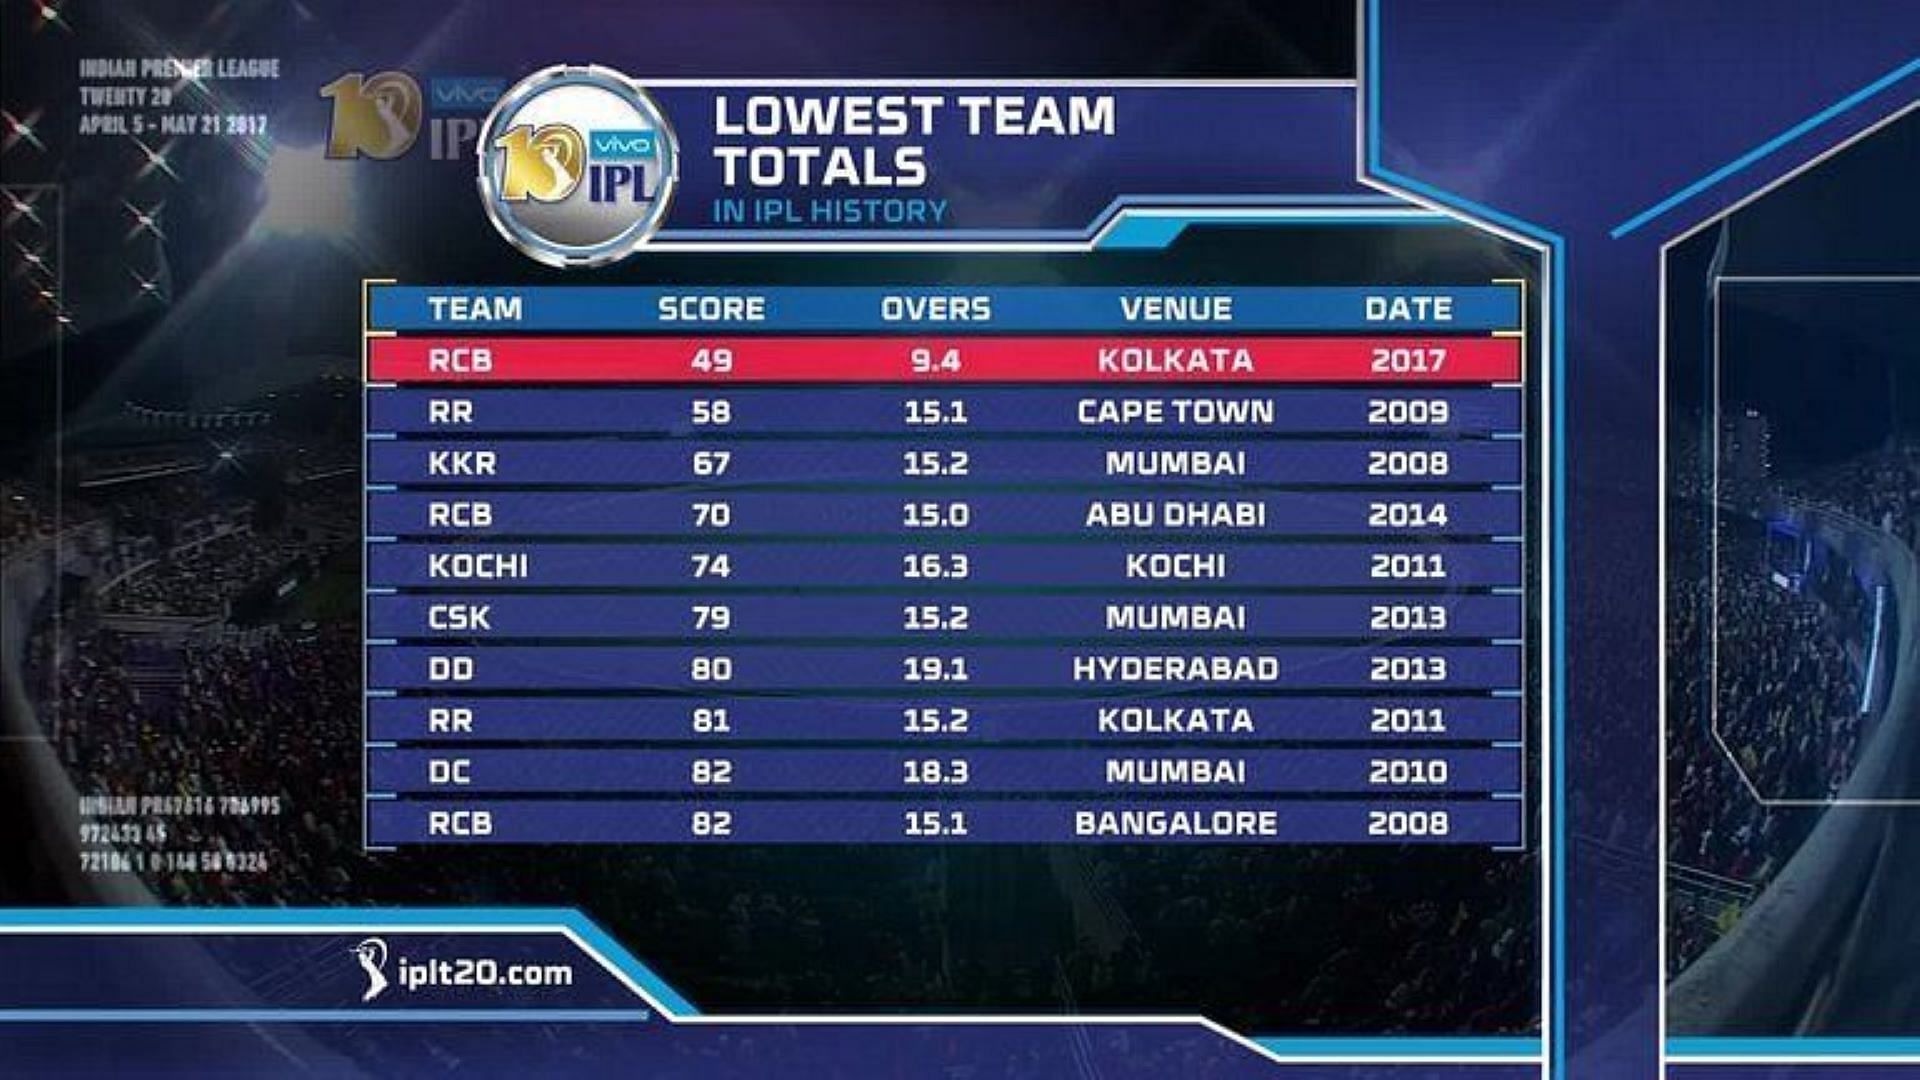 RCB was all-out for the lowest IPL score in the tournament&#039;s history in IPL 2017.